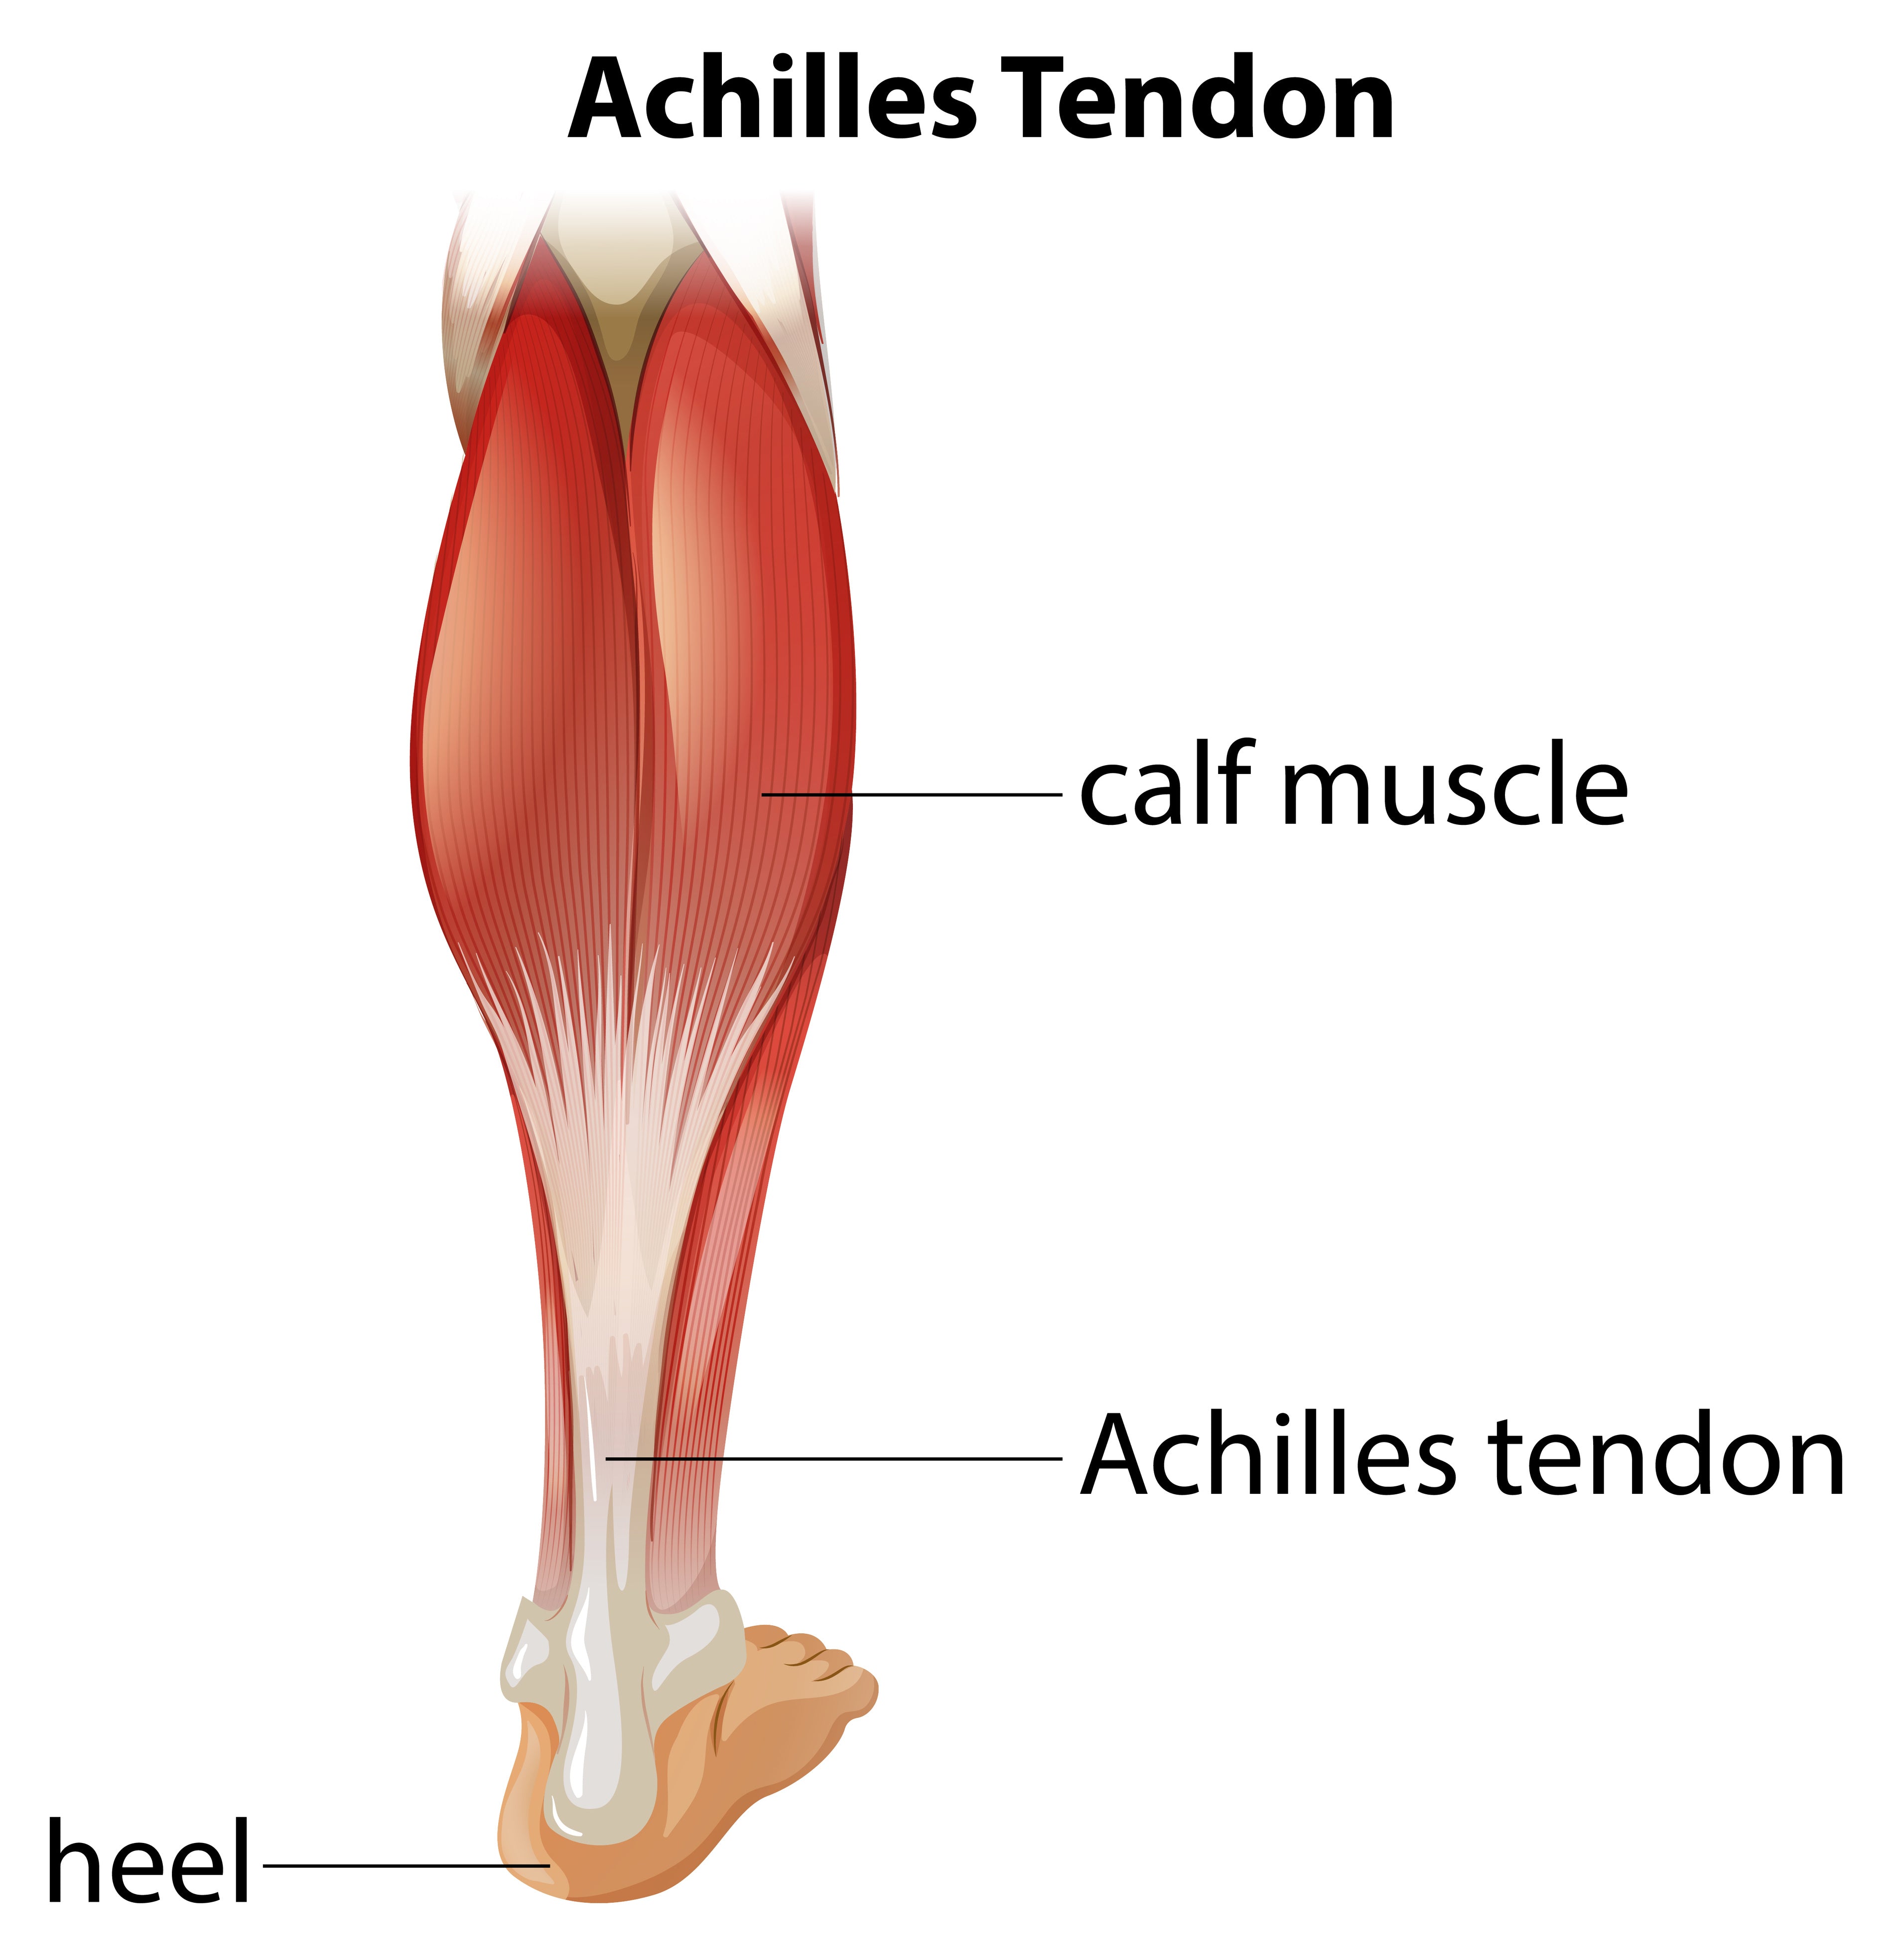 Achilles Tendon rupture ,tear, tendonitis - Everything You Need To Know -  Dr. Nabil Ebraheim - YouTube